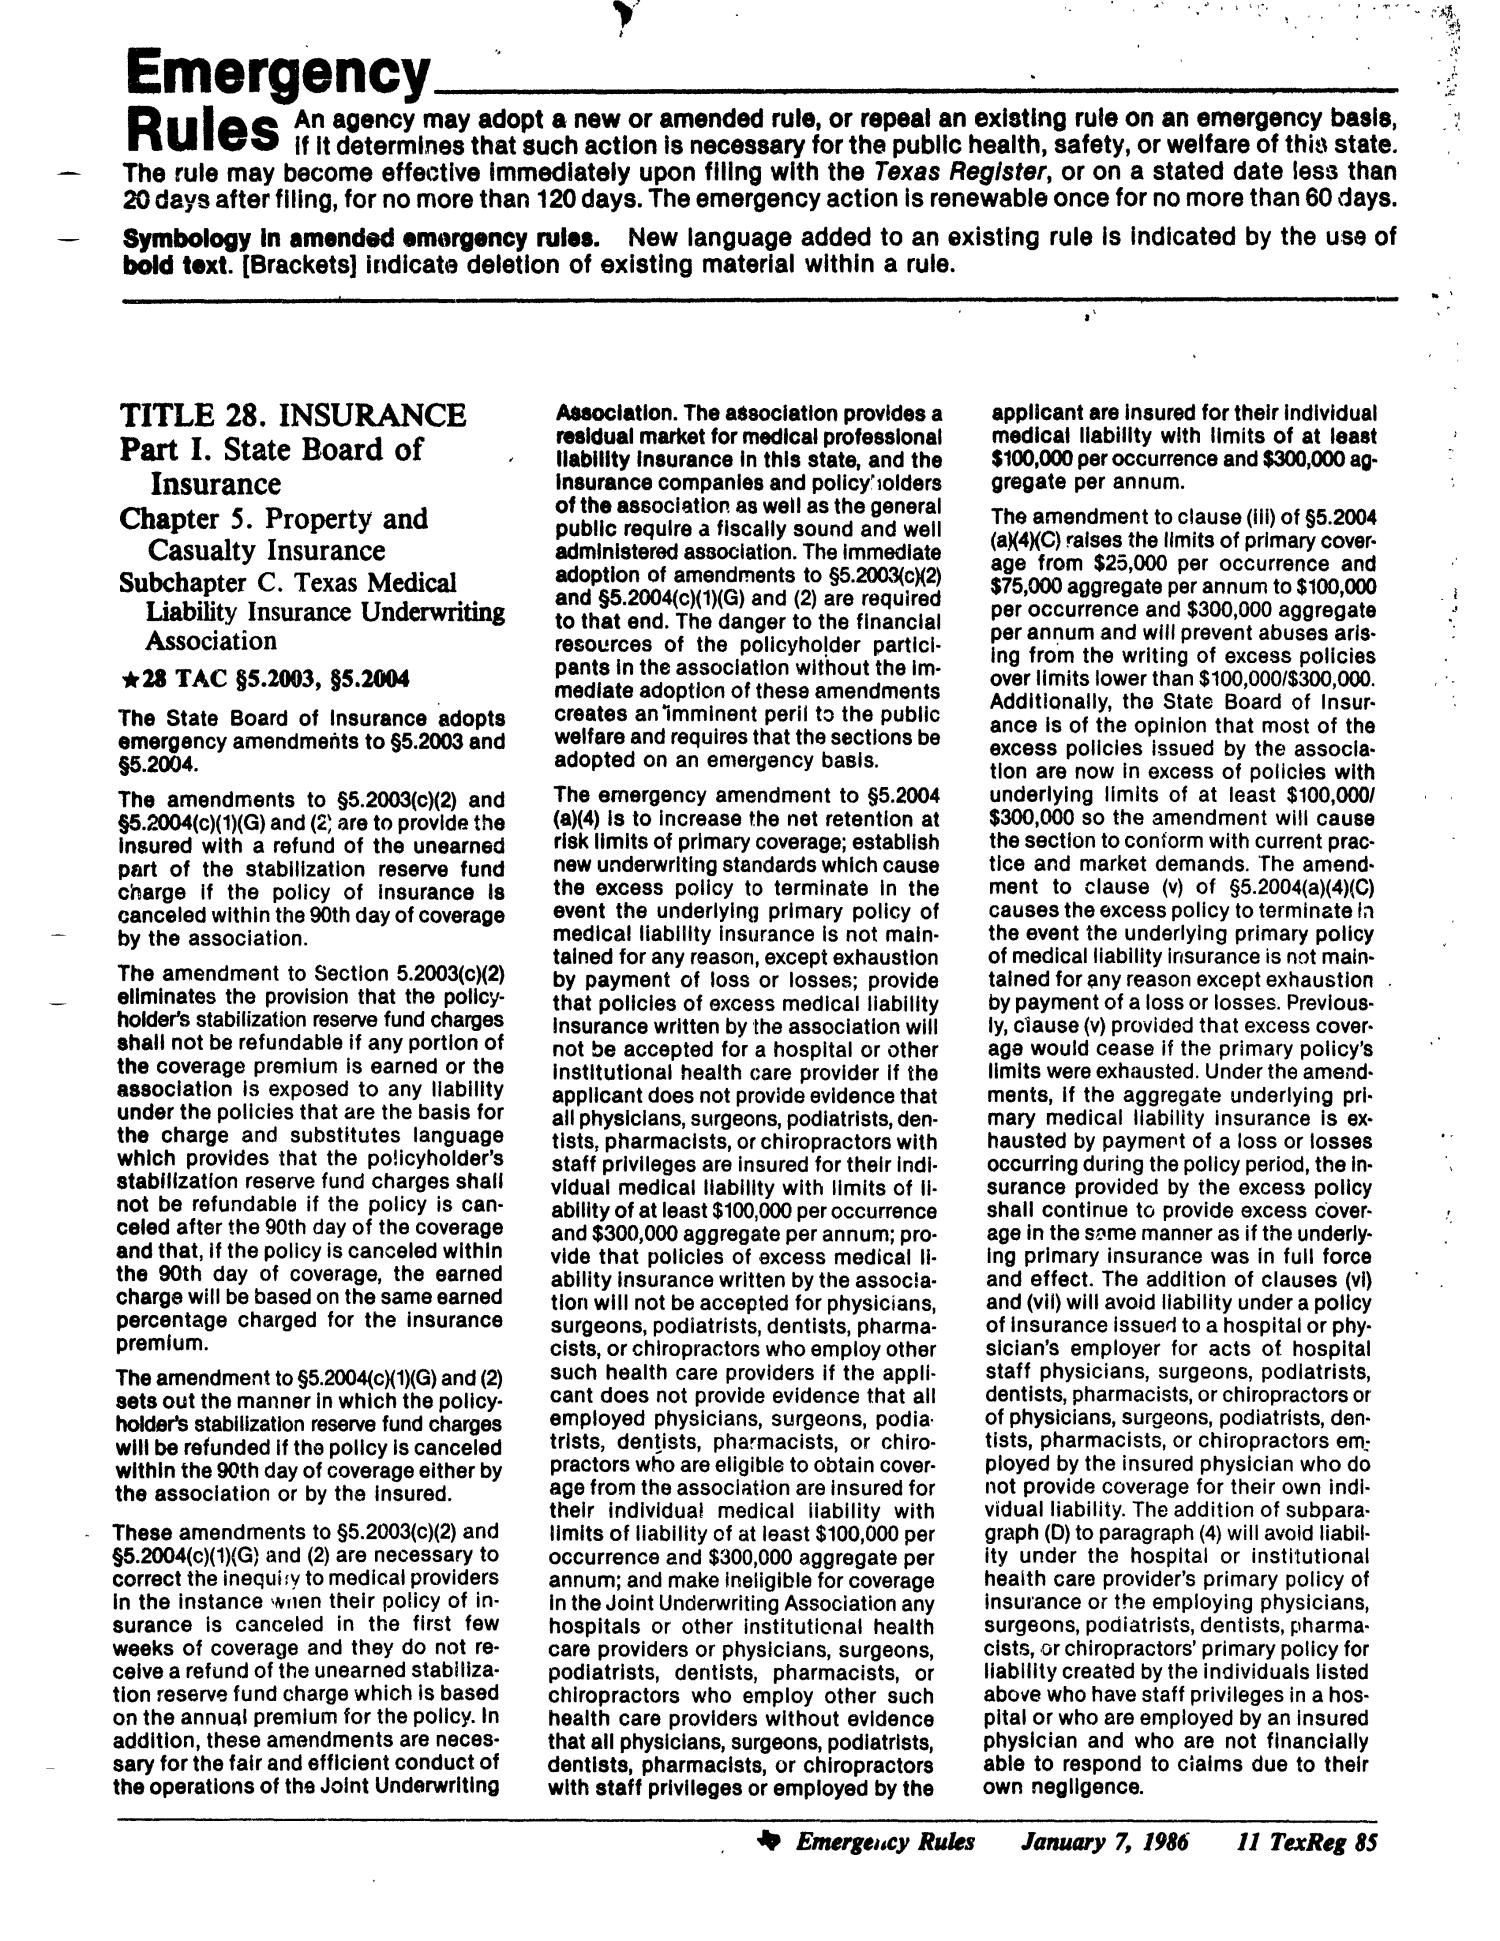 Texas Register, Volume 11, Number 2, Pages 81-106, January 7, 1986
                                                
                                                    85
                                                